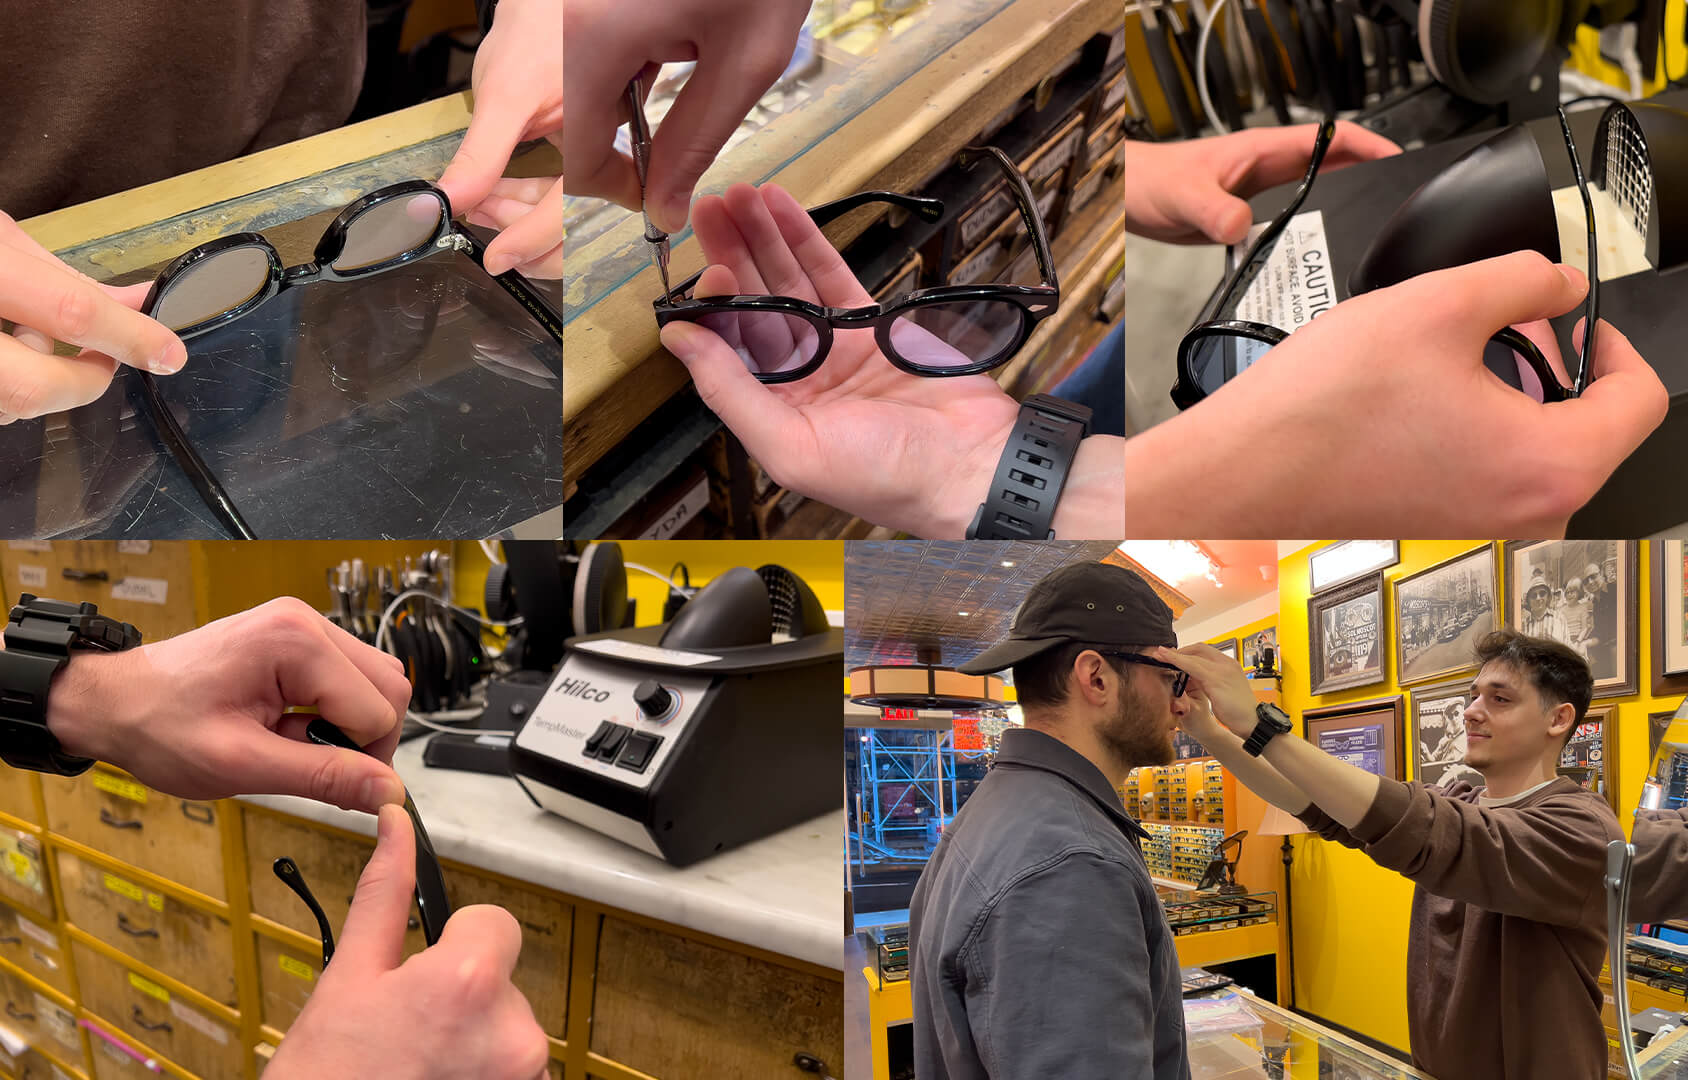 One of our frame specialists can get you properly sized and fit at MOSCOT